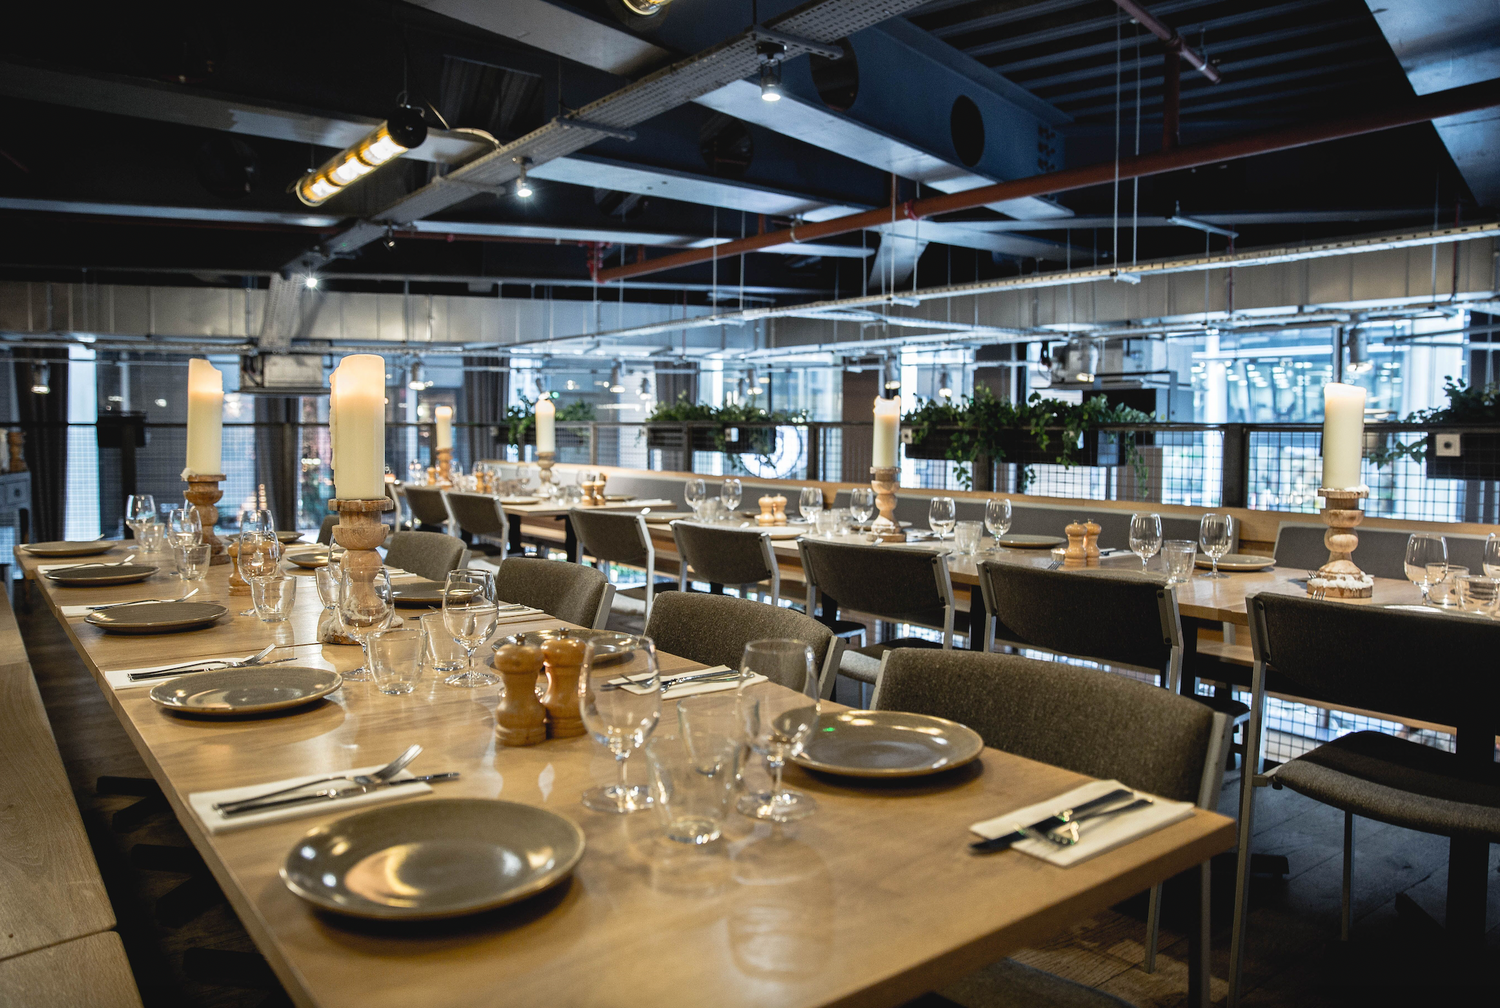 Hire the mezzanine at Caravan City in Bloomberg Arcade for private dining, corporate events, group bookings and your party